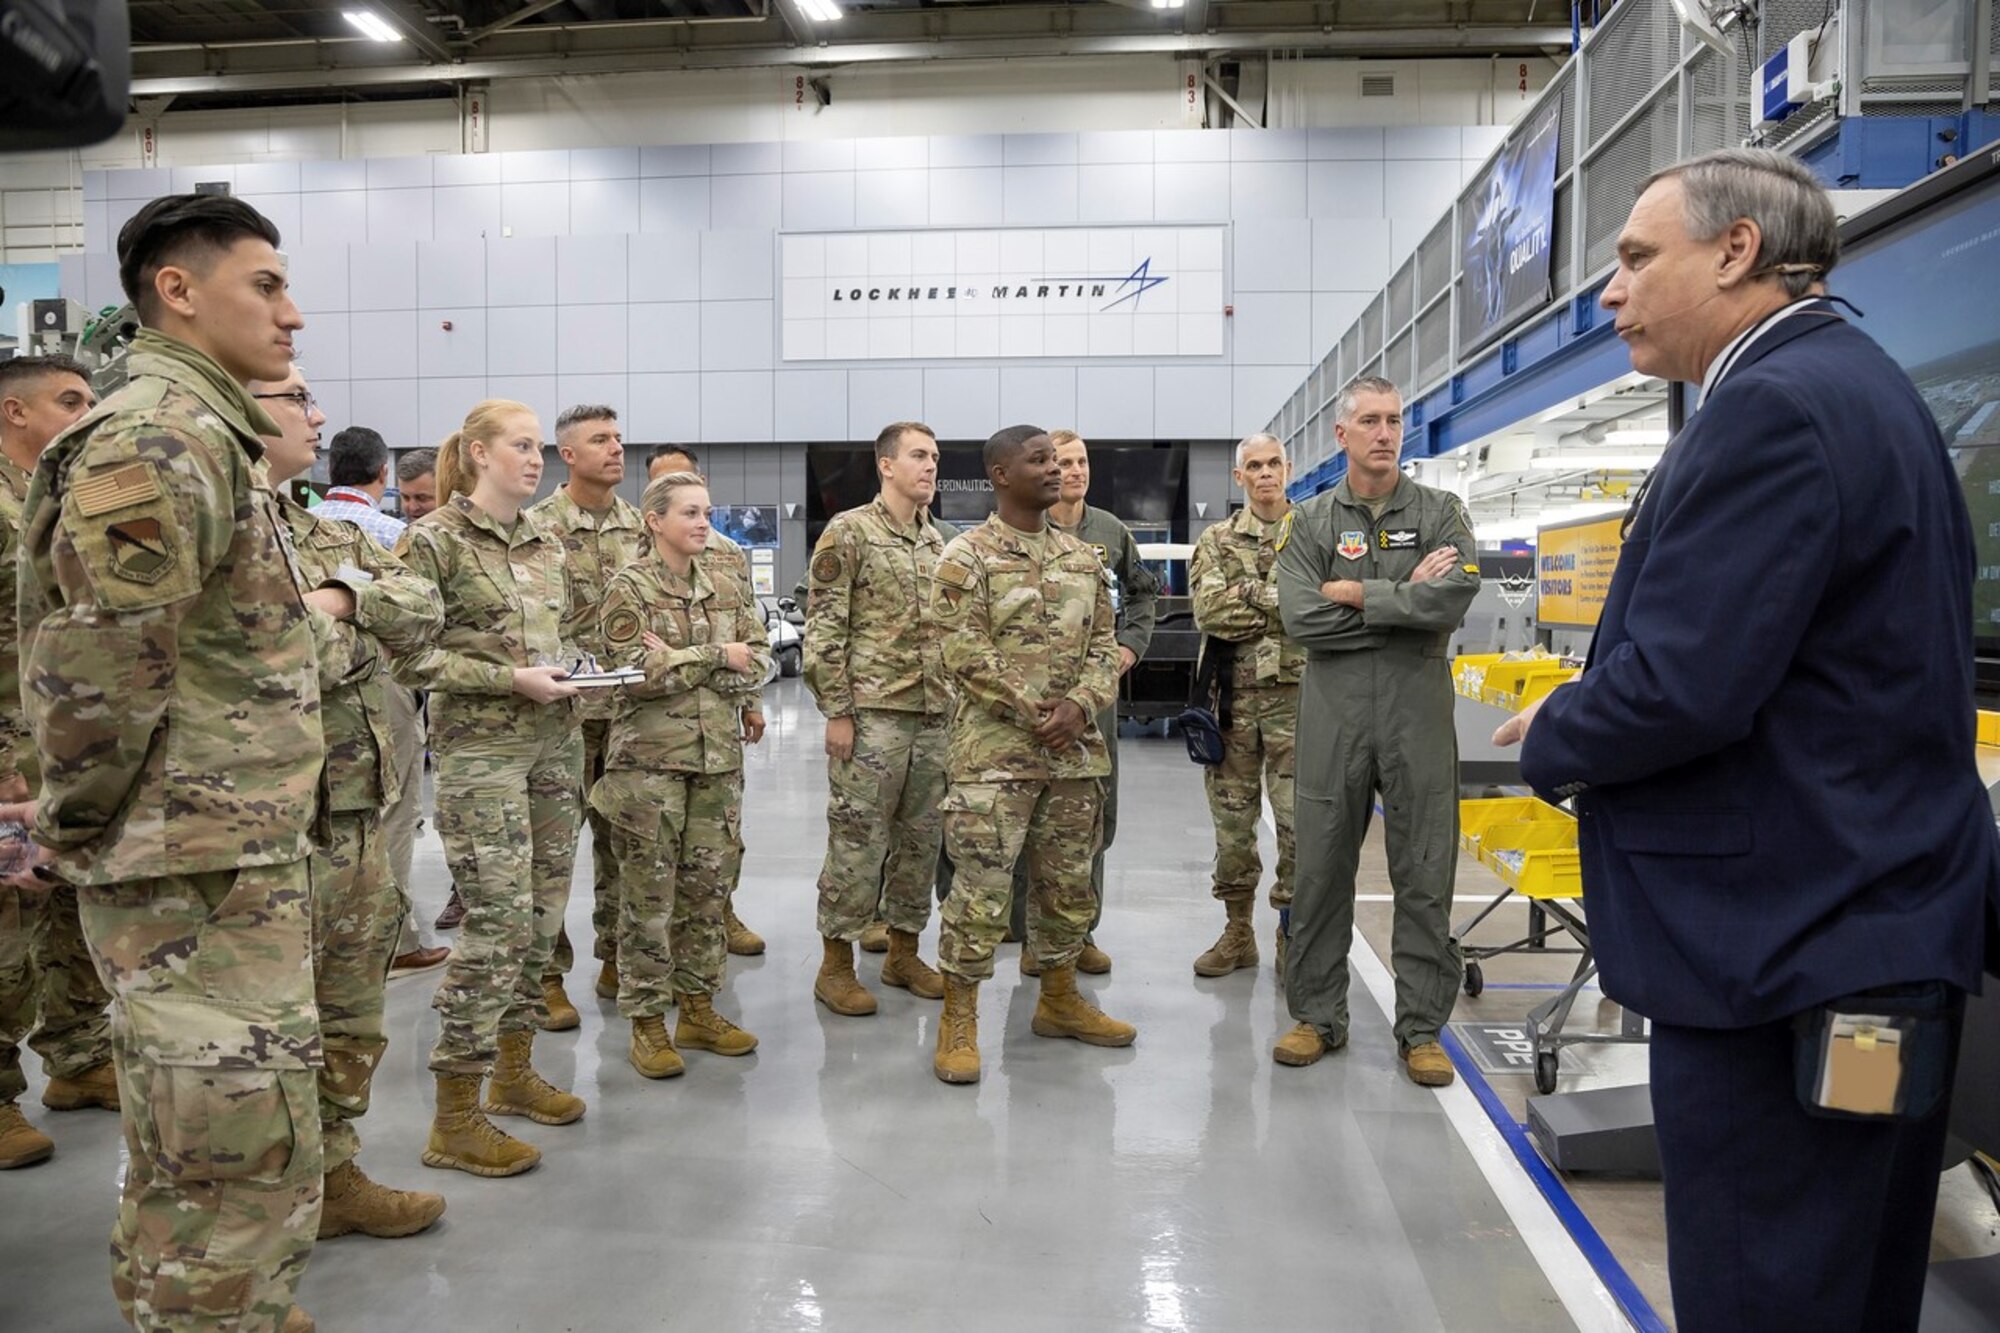 U.S. Airmen assigned to Tyndall Air Force Base, Florida, receive a briefing on Lockheed Martin’s F-35 Lightning II facility at the Lockheed Martin factory in Fort Worth, Texas, Oct. 20, 2022.